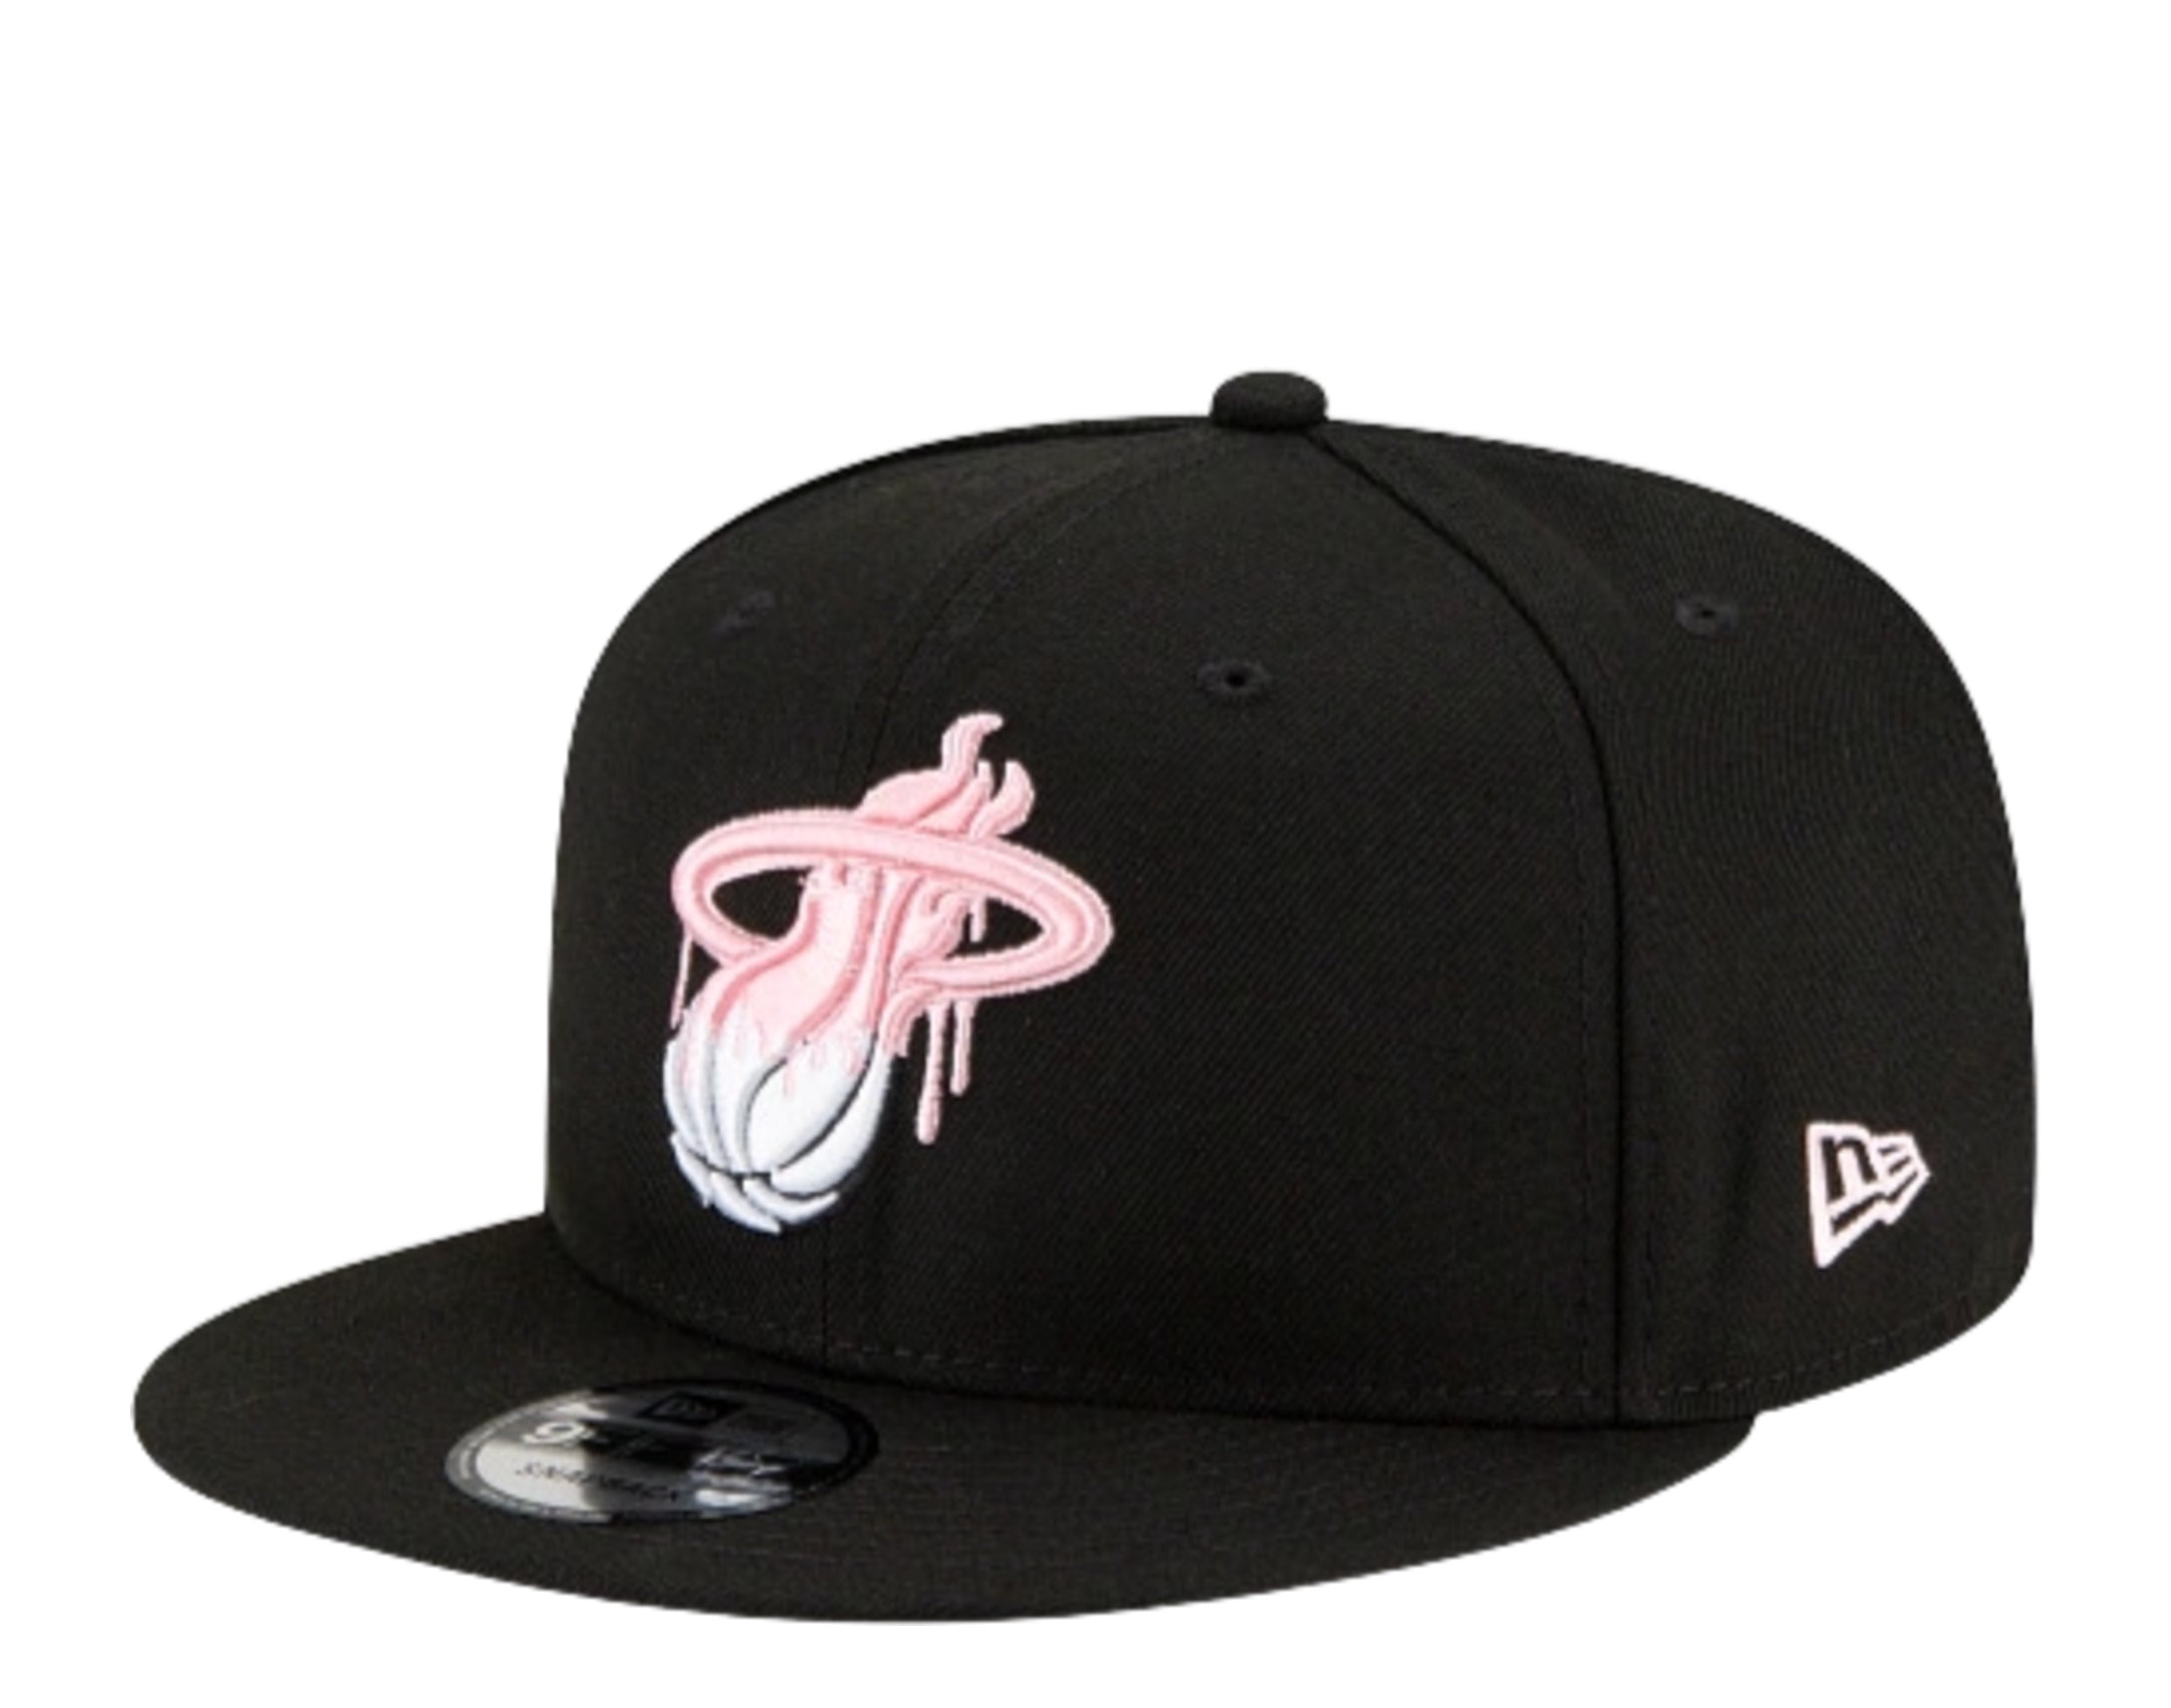 Miami Heat Red Hot 9FIFTY New Era Fits Snapback Hat by Devious Elements Apparel